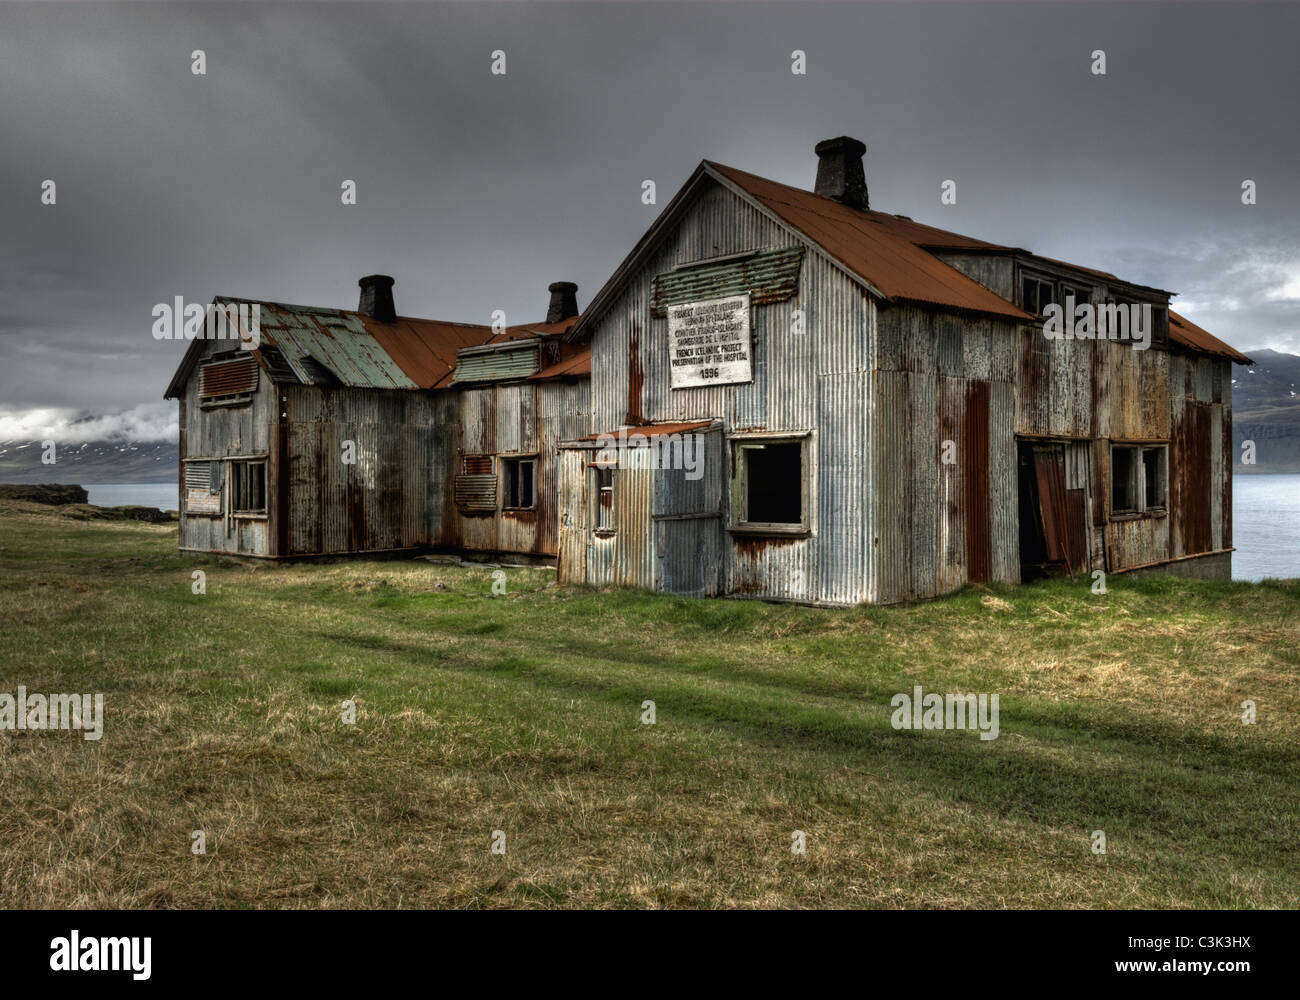 Iceland, View of abandoned wooden hut Stock Photo